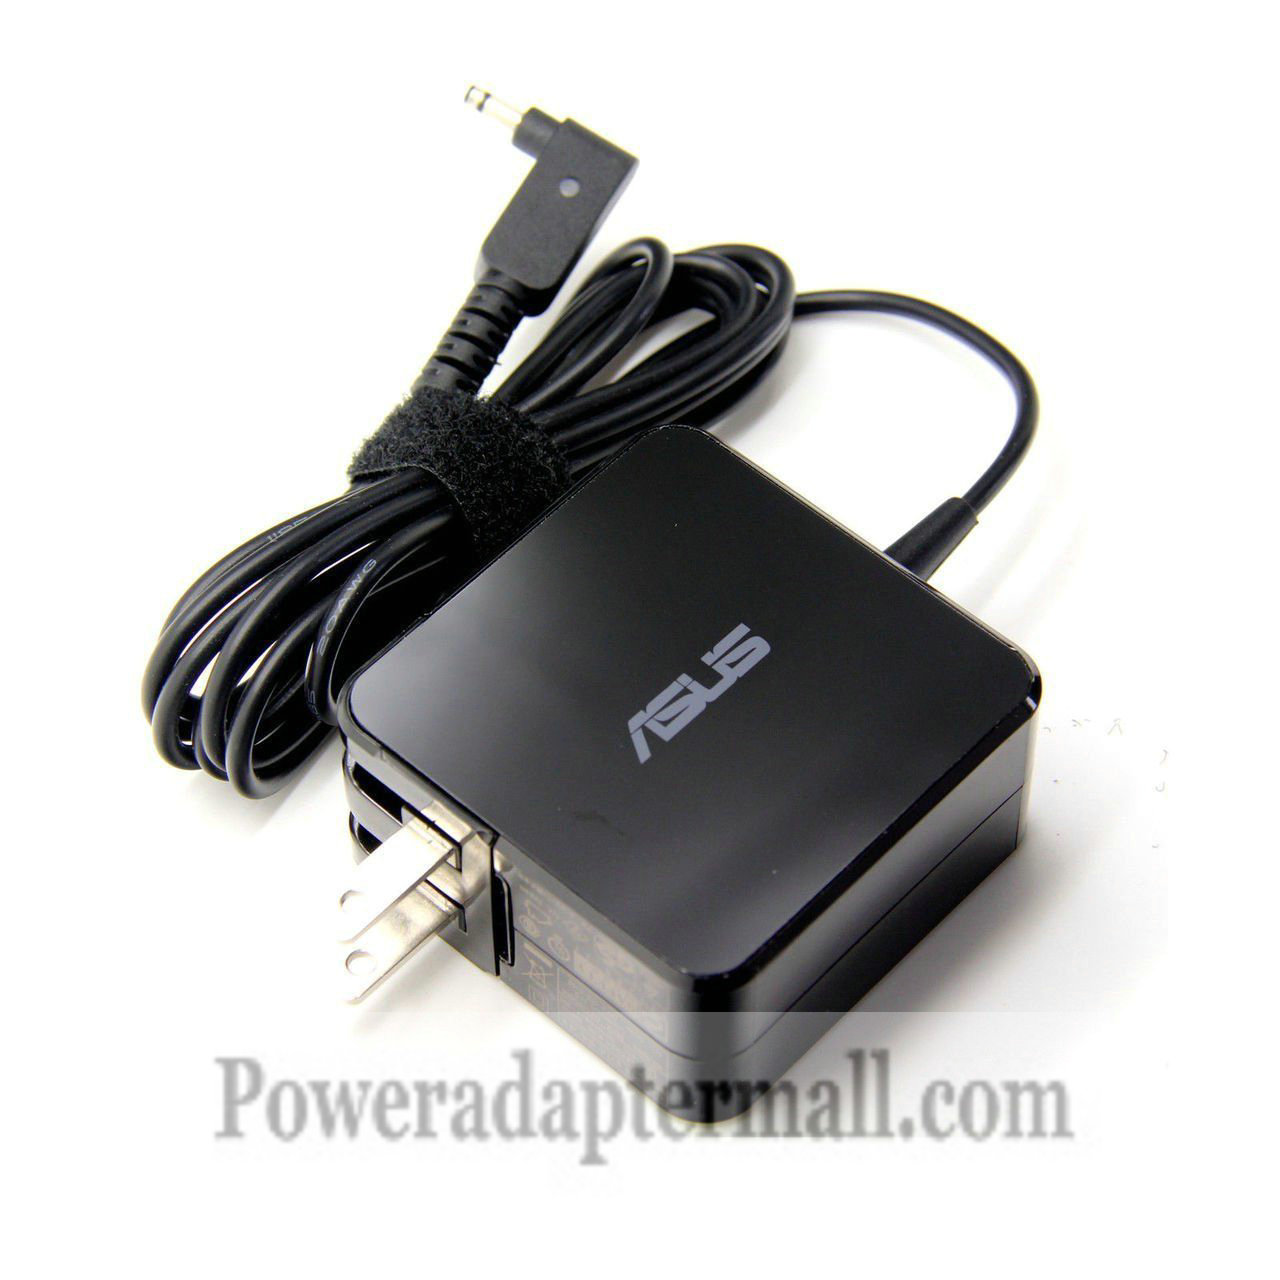 Genuine Asus ZenBook UX31A-DB71 ADP-45AW A 45W AC Adapter Power